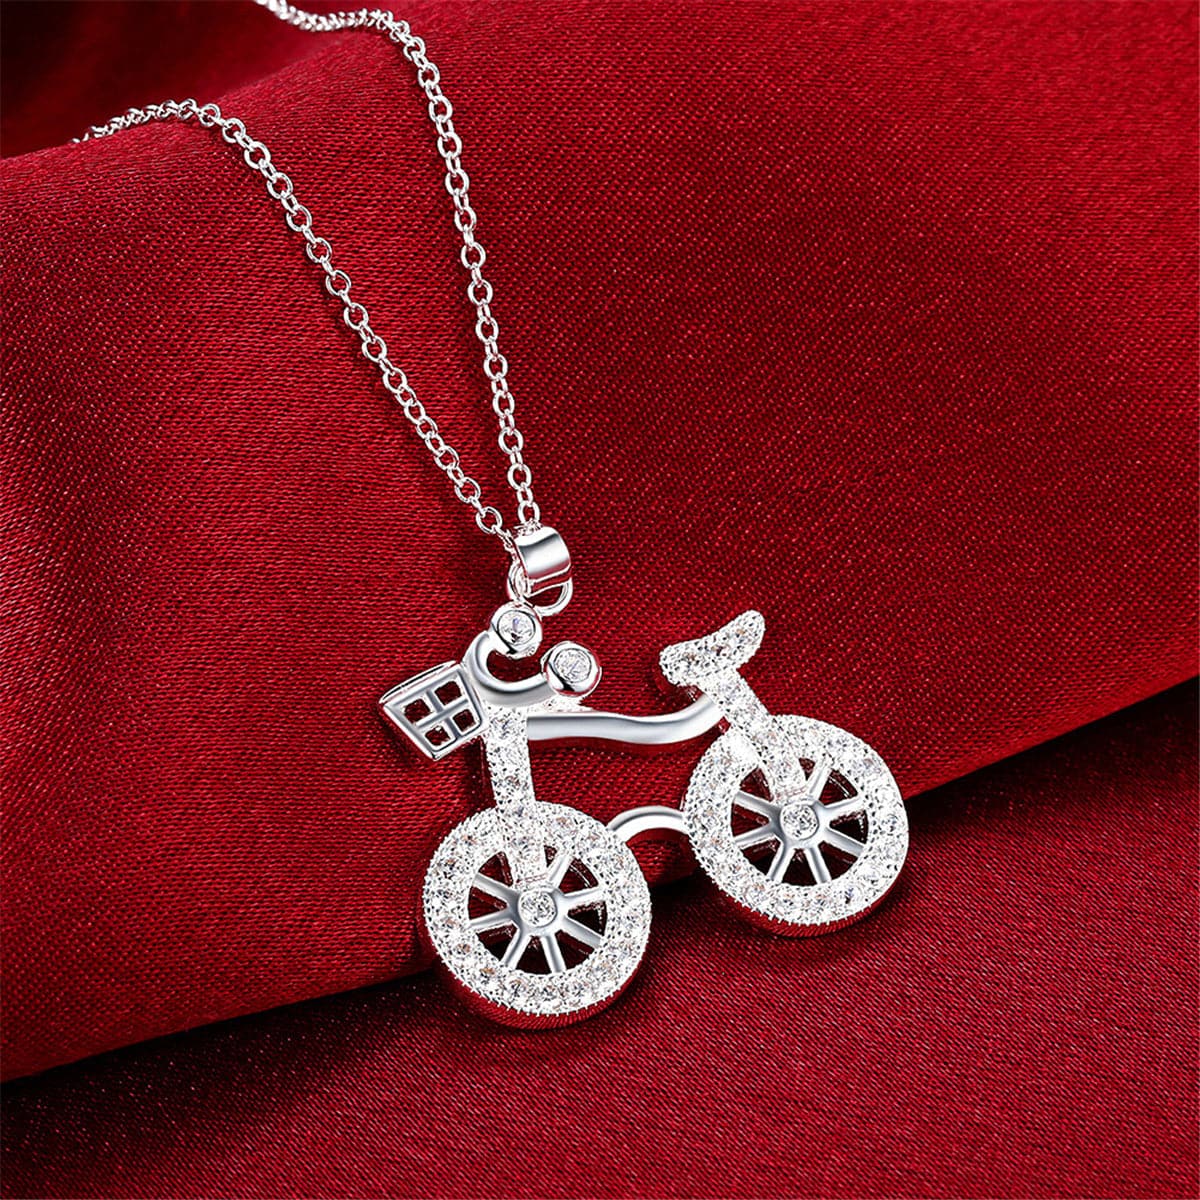 Cubic Zirconia & Silver-Plated Bicycle Pendant Necklace - streetregion